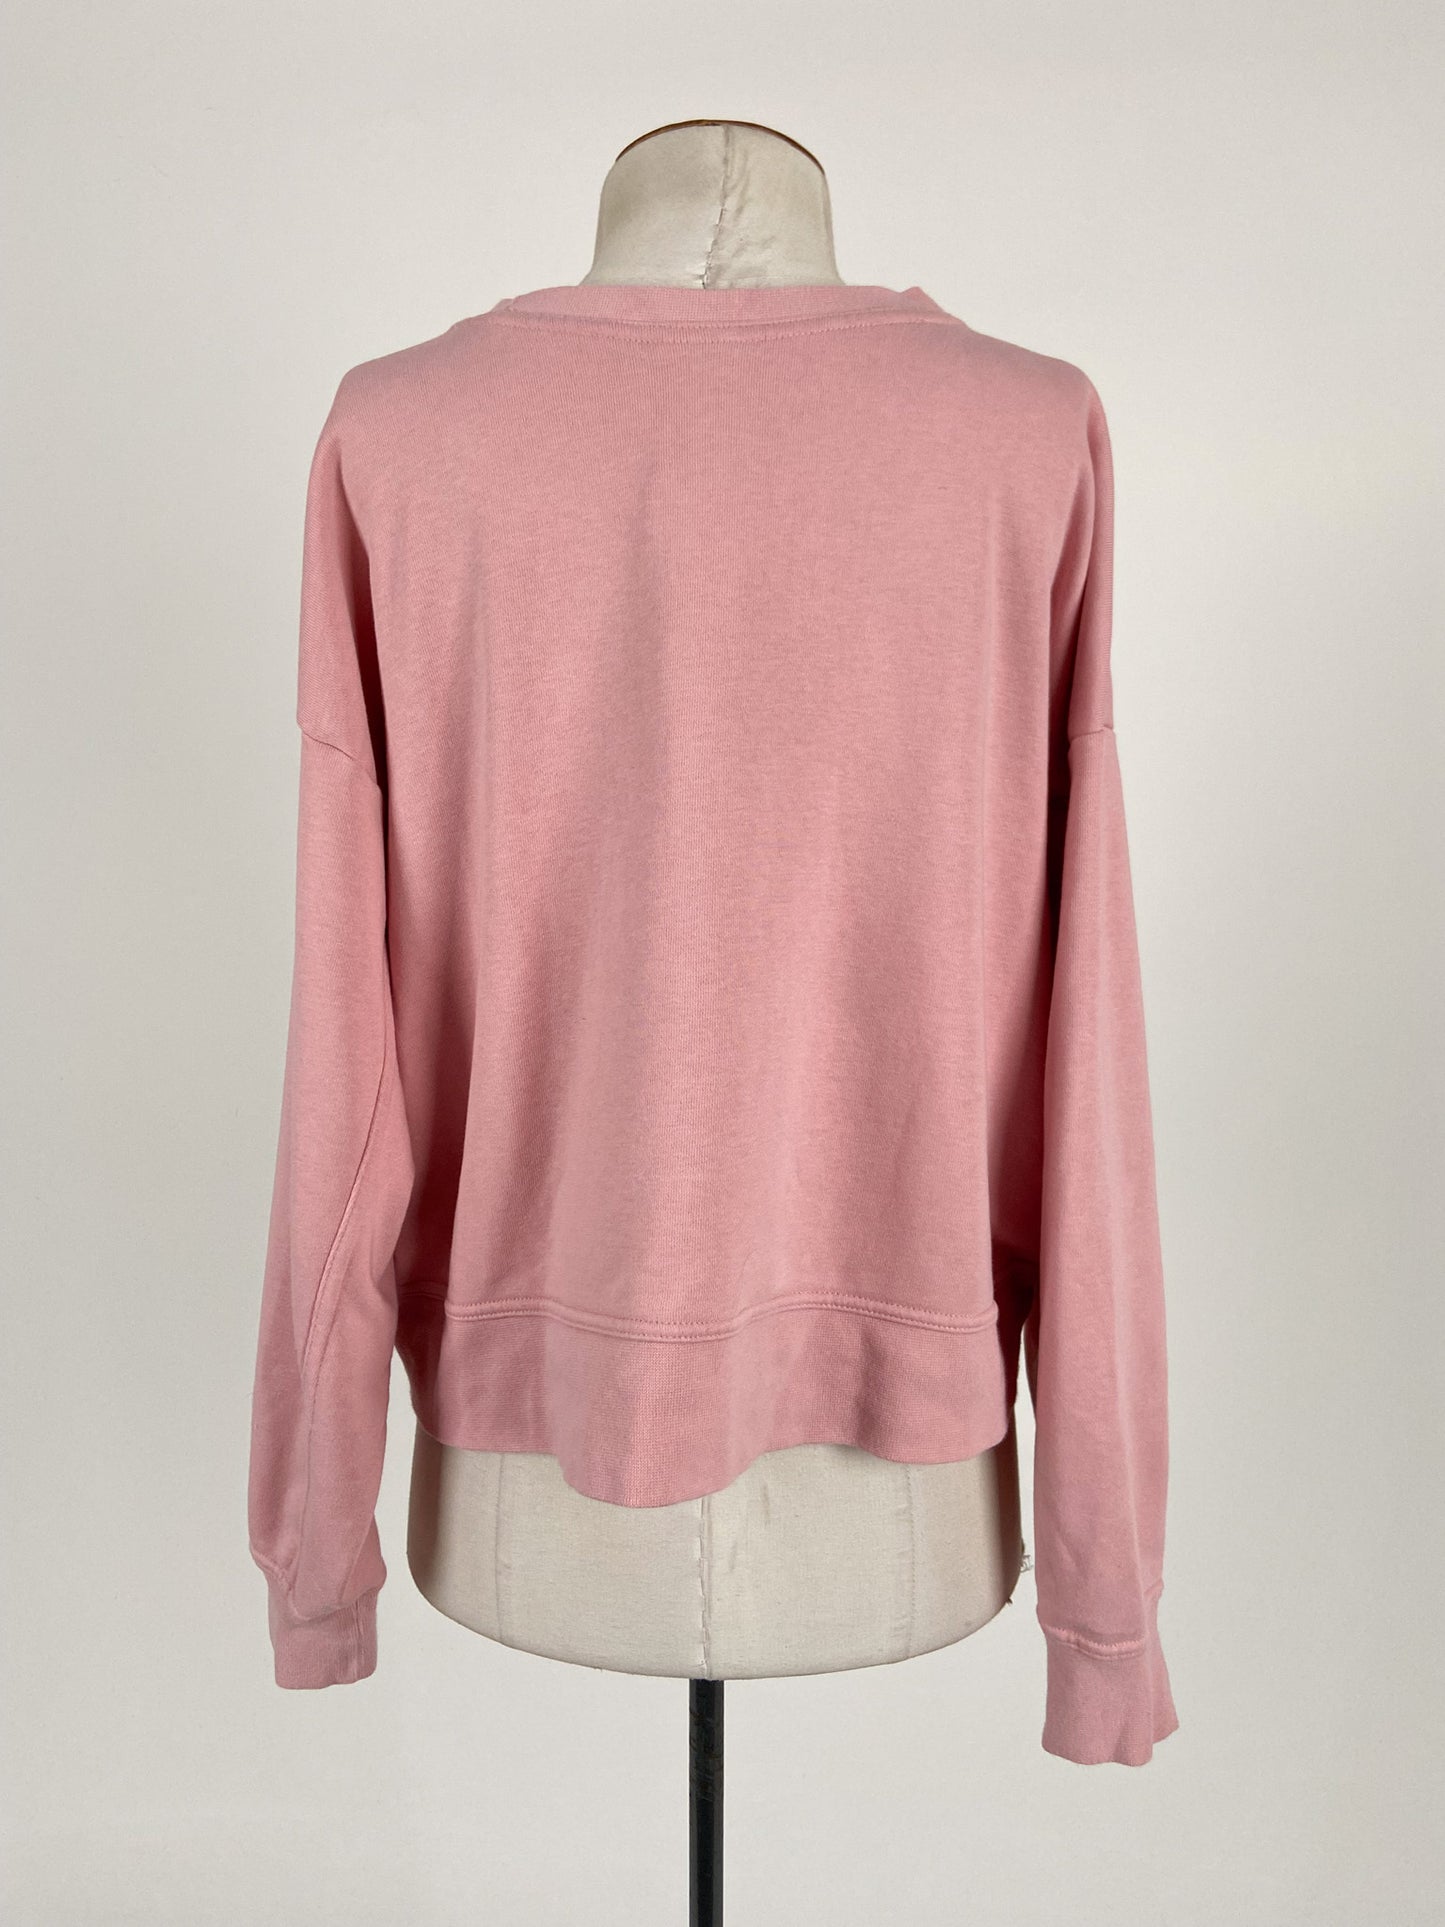 Nike | Pink Casual Jumper | Size M